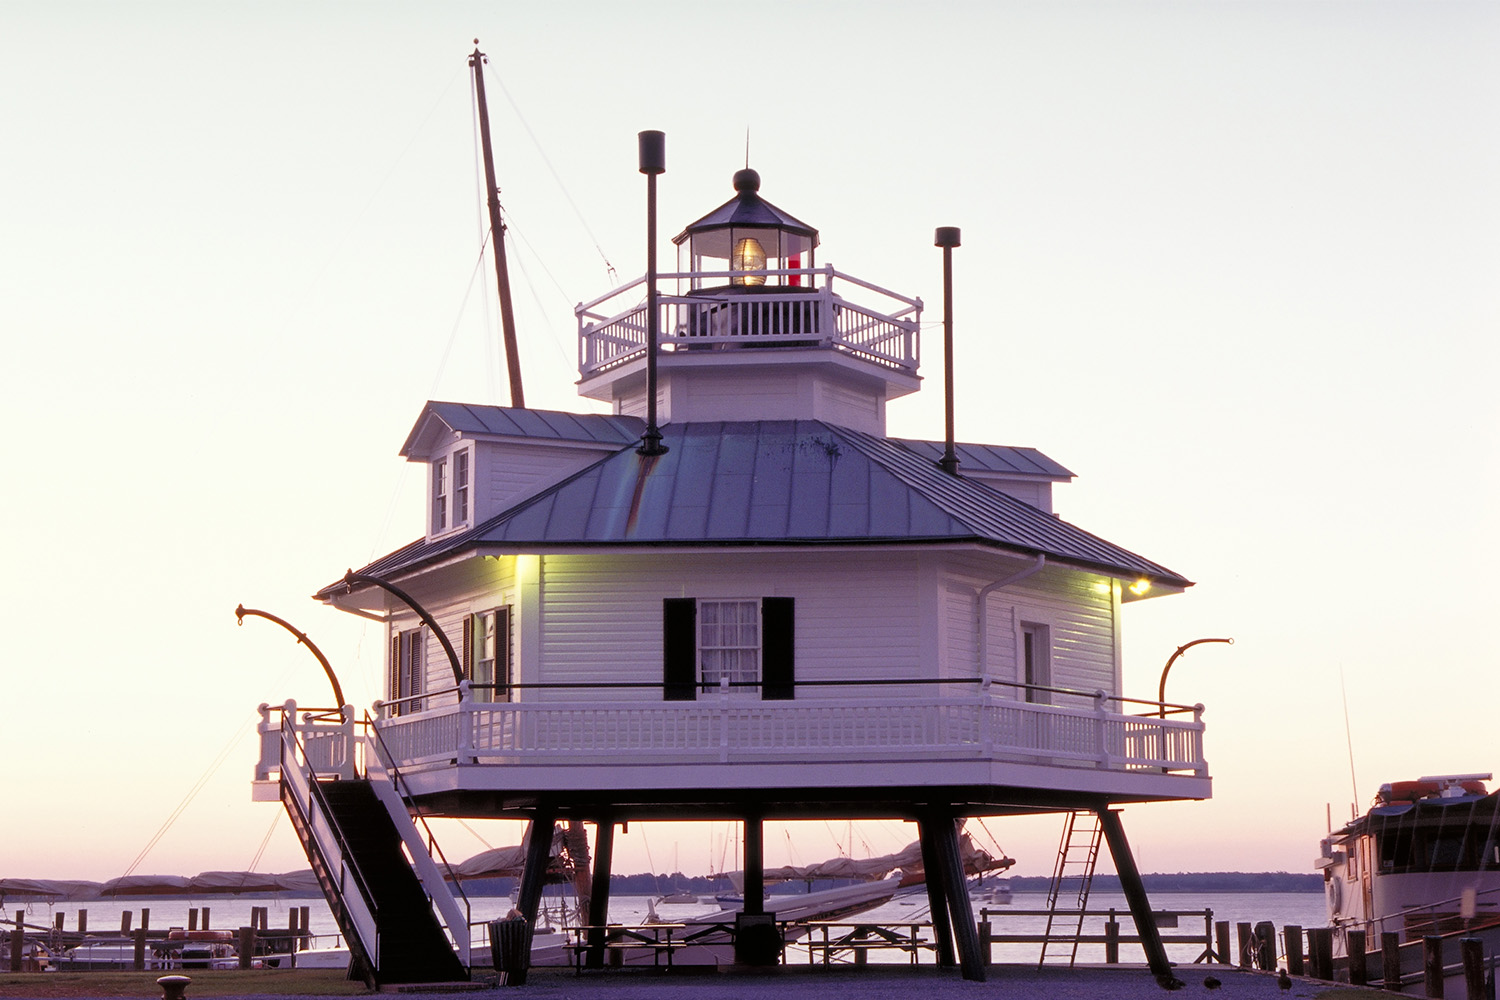 This screwpile cottage-style lighthouse was originally built in 1879 on Tangier Sound, on the eastern side of the Chesapeake Bay.